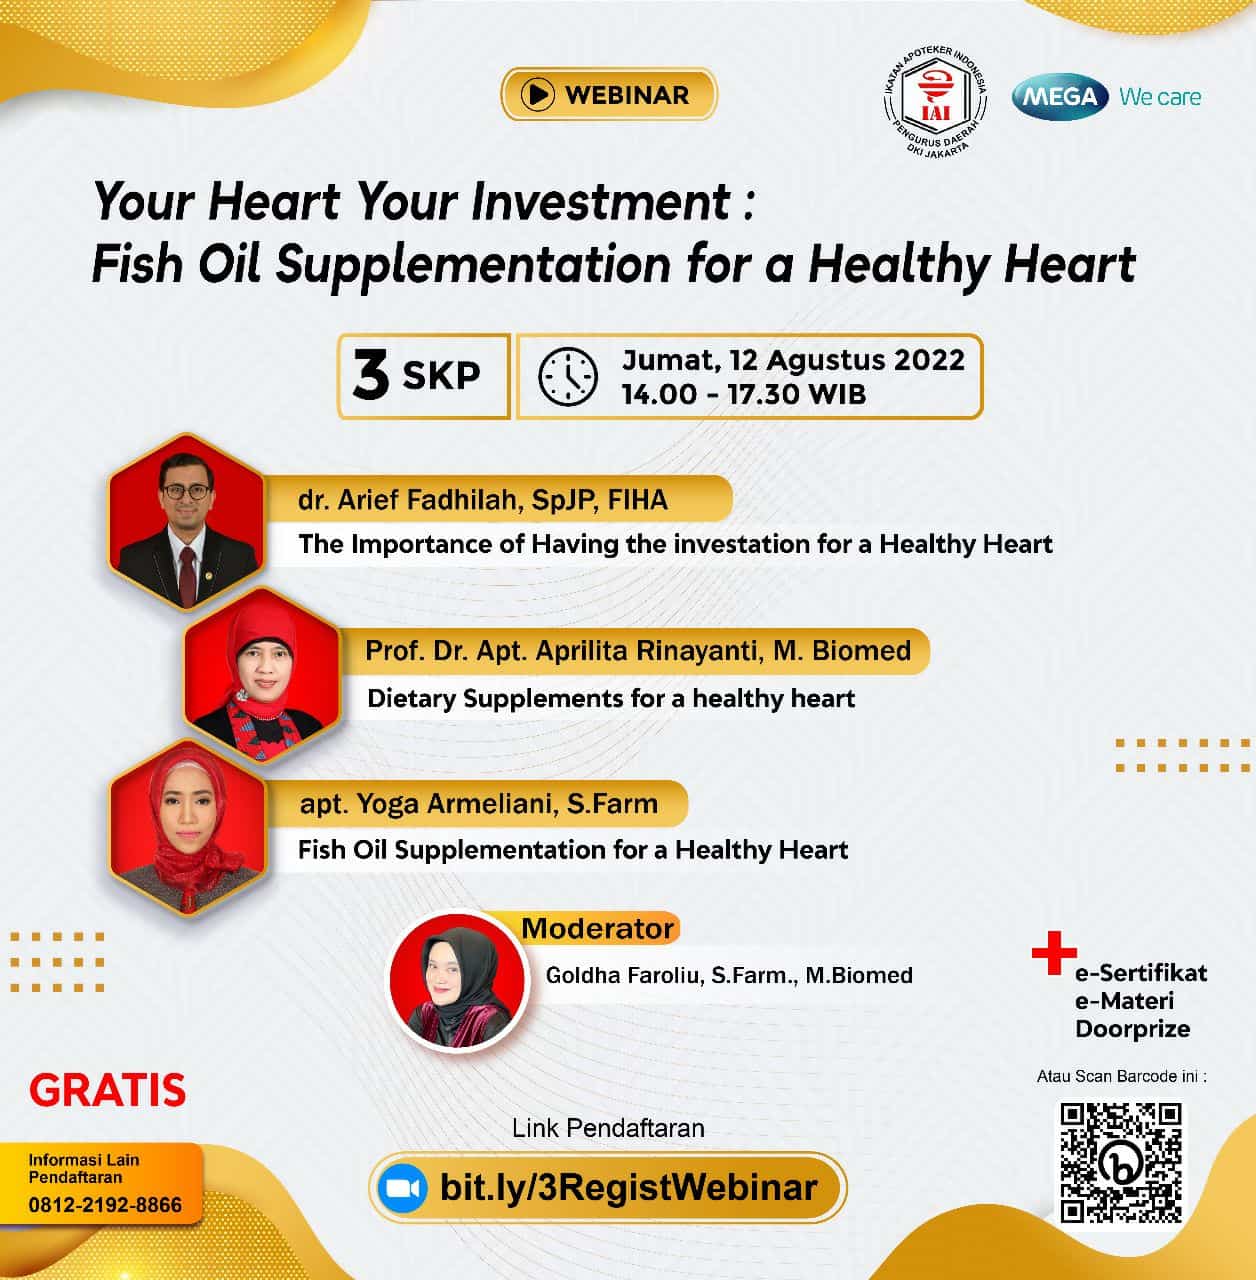 Your Heart Your Investment: Fish Oil Supplementation for a Healthy Heart